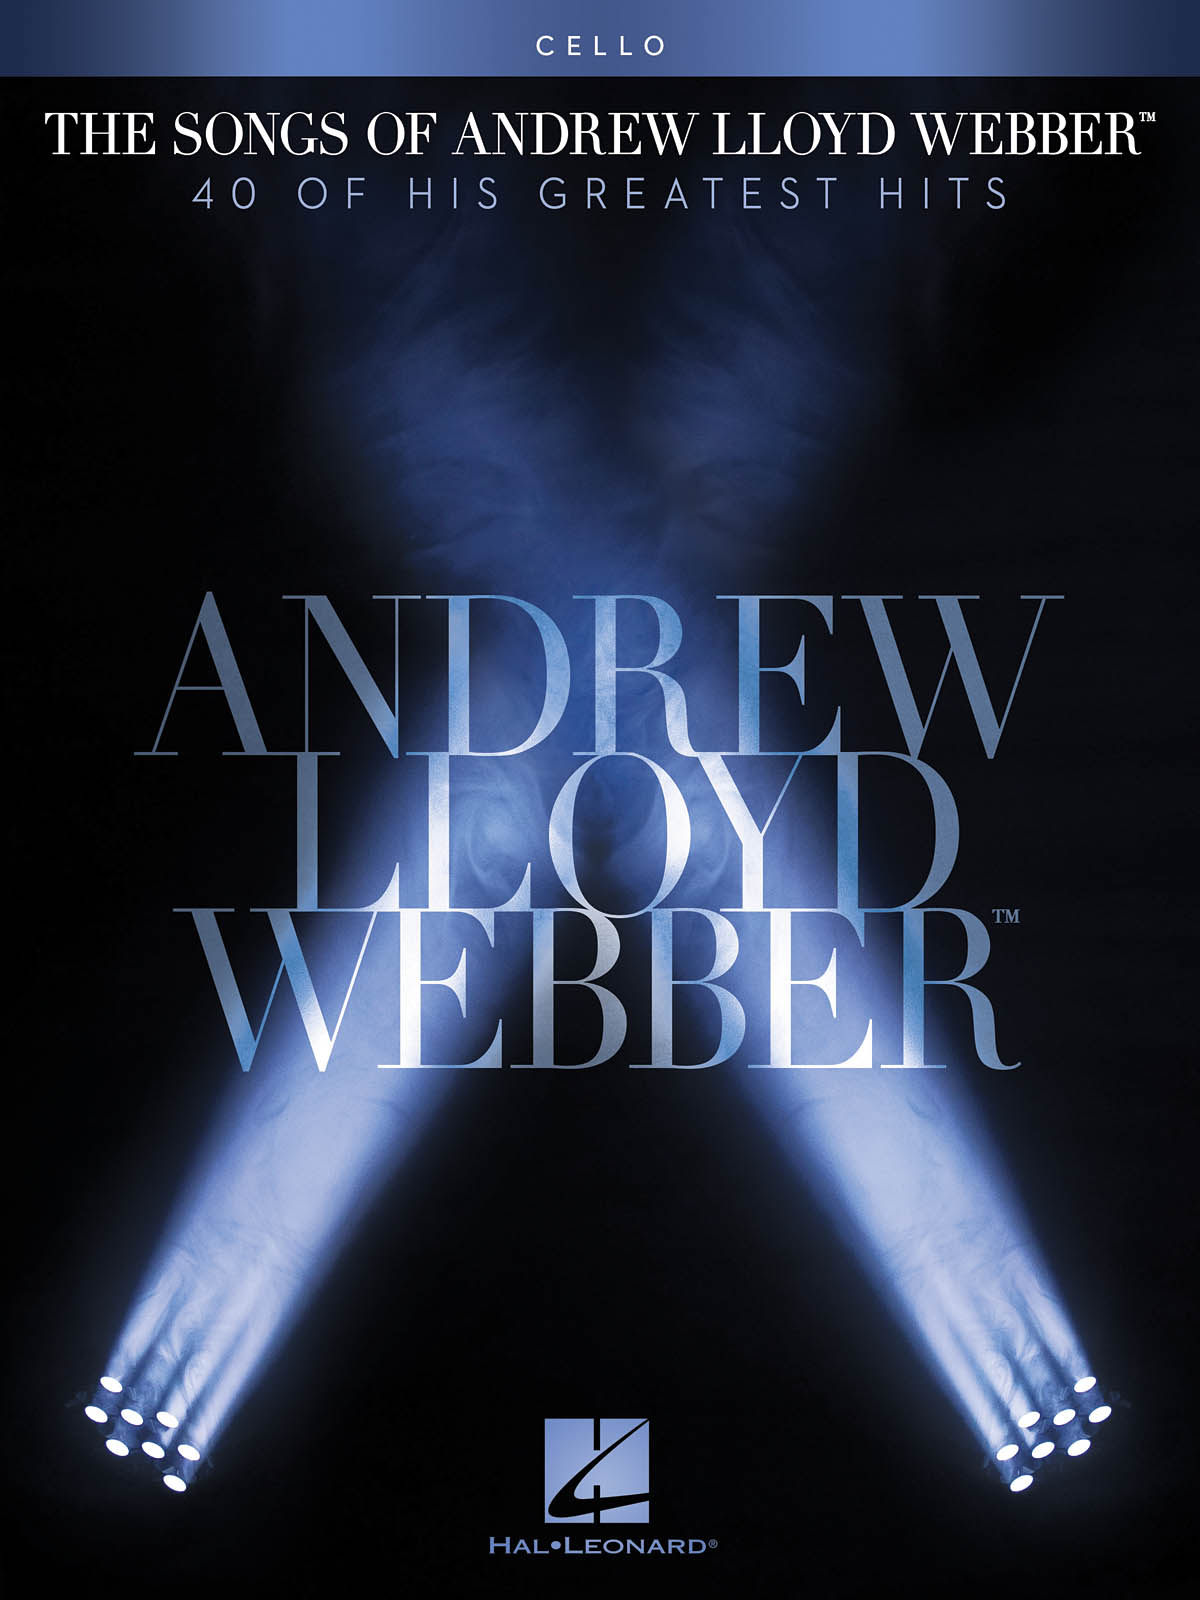 The Songs of Andrew Lloyd Webber - Cello - noty pro violoncello